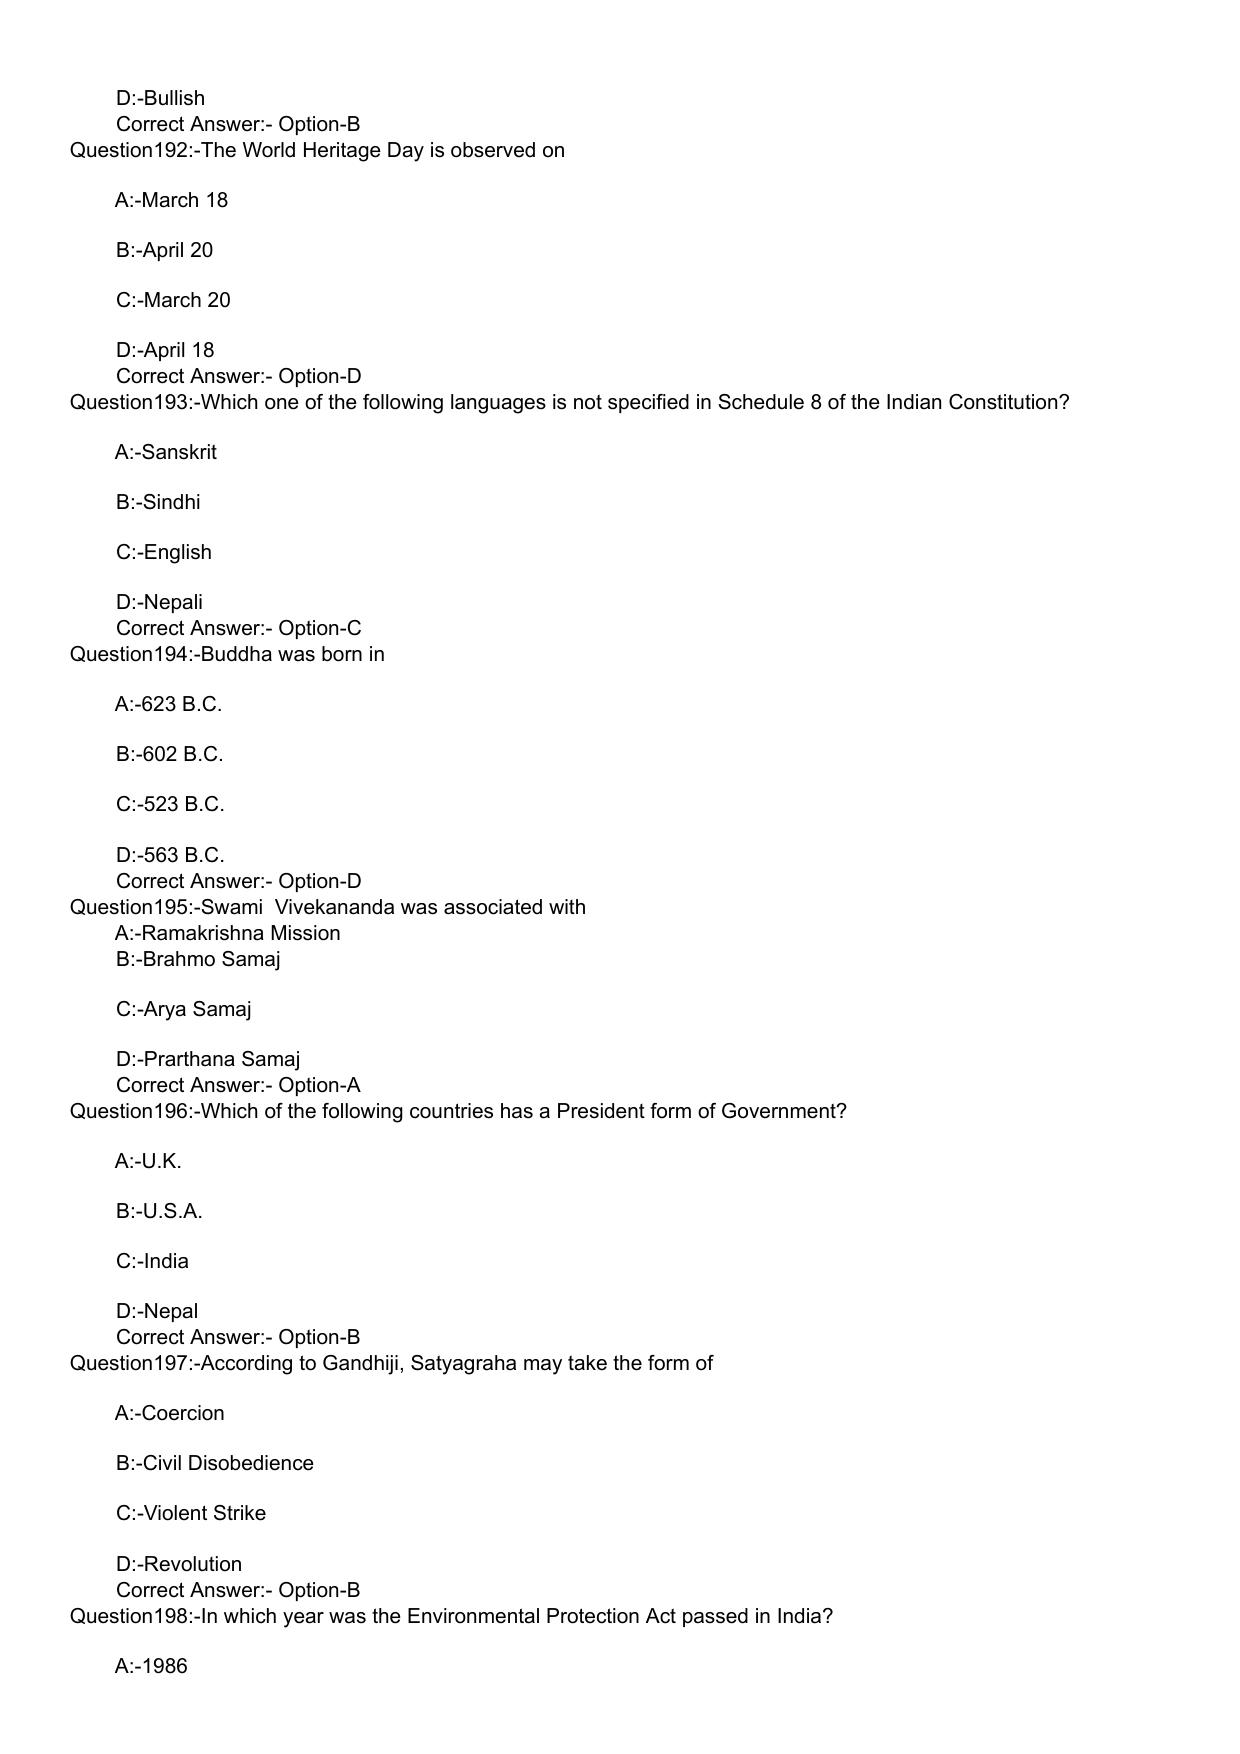 KLEE 5 Year LLB Exam 2020 Question Paper - Page 33